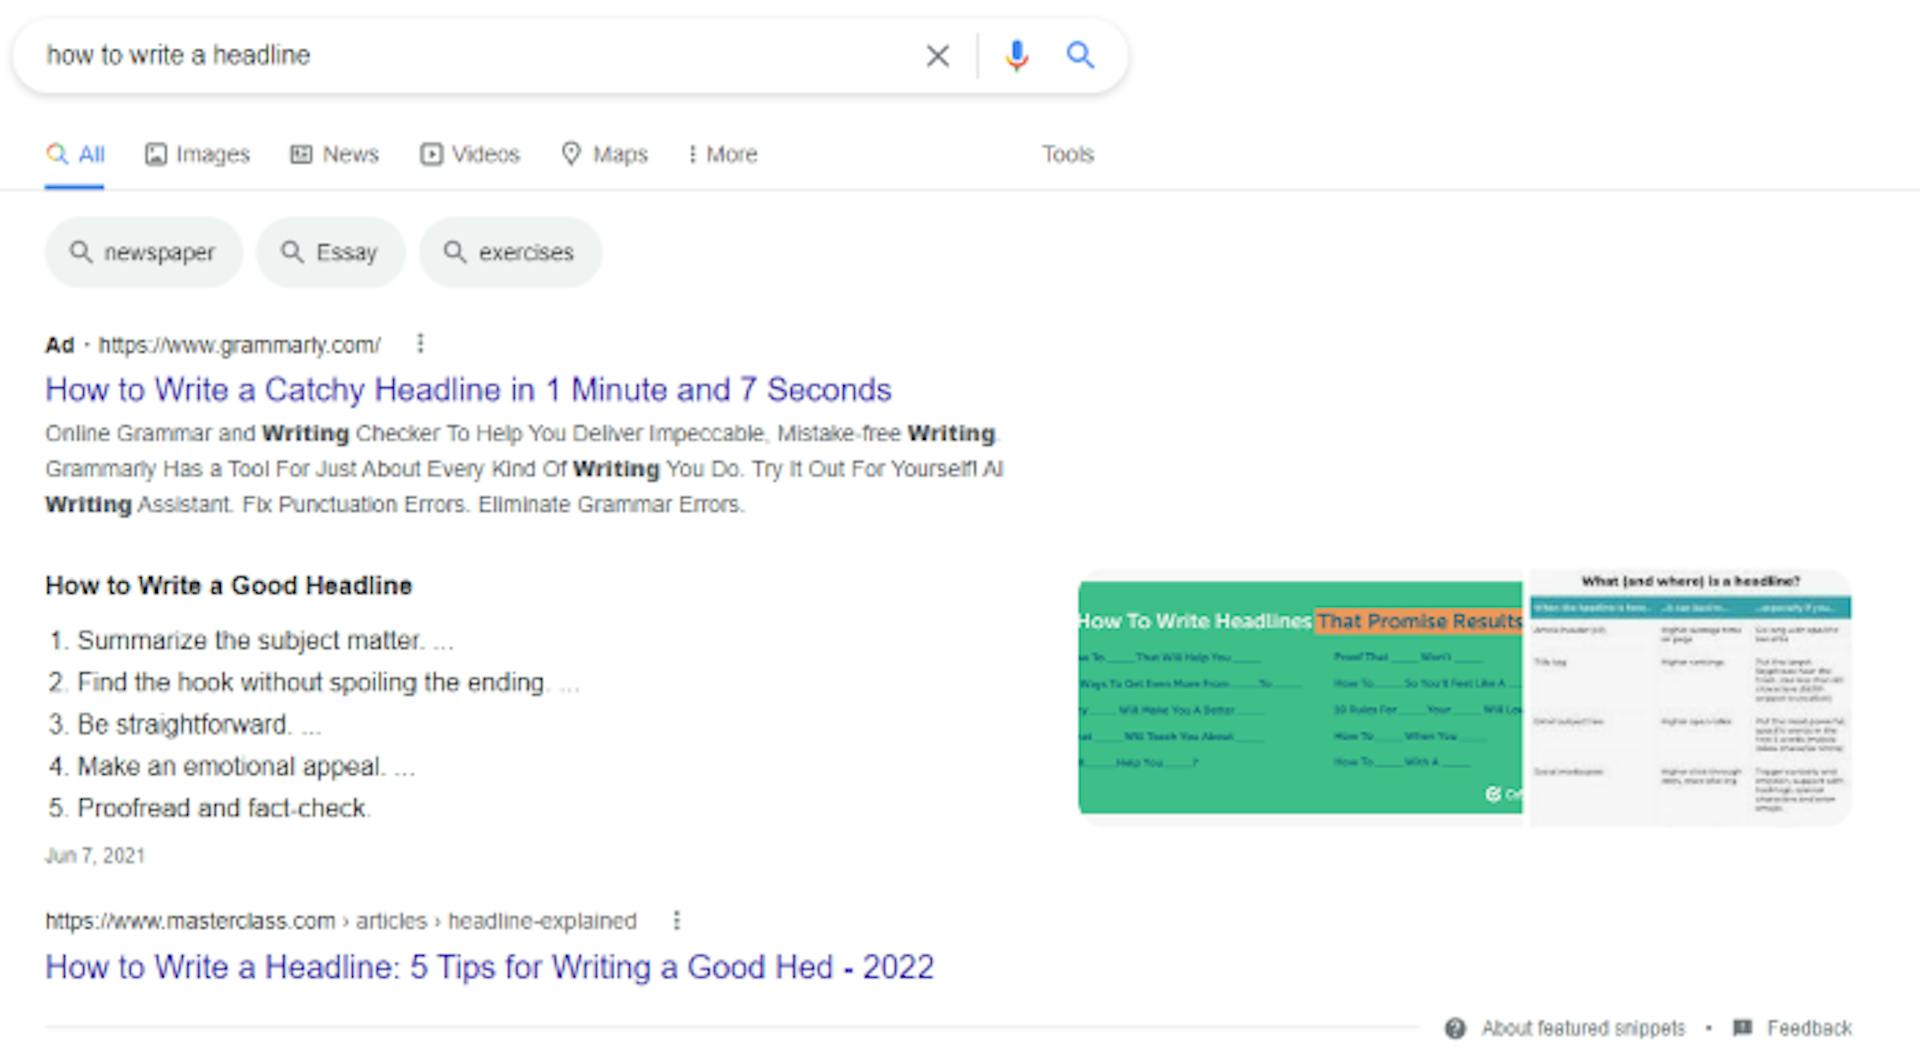 featured snippet optimized with headlines